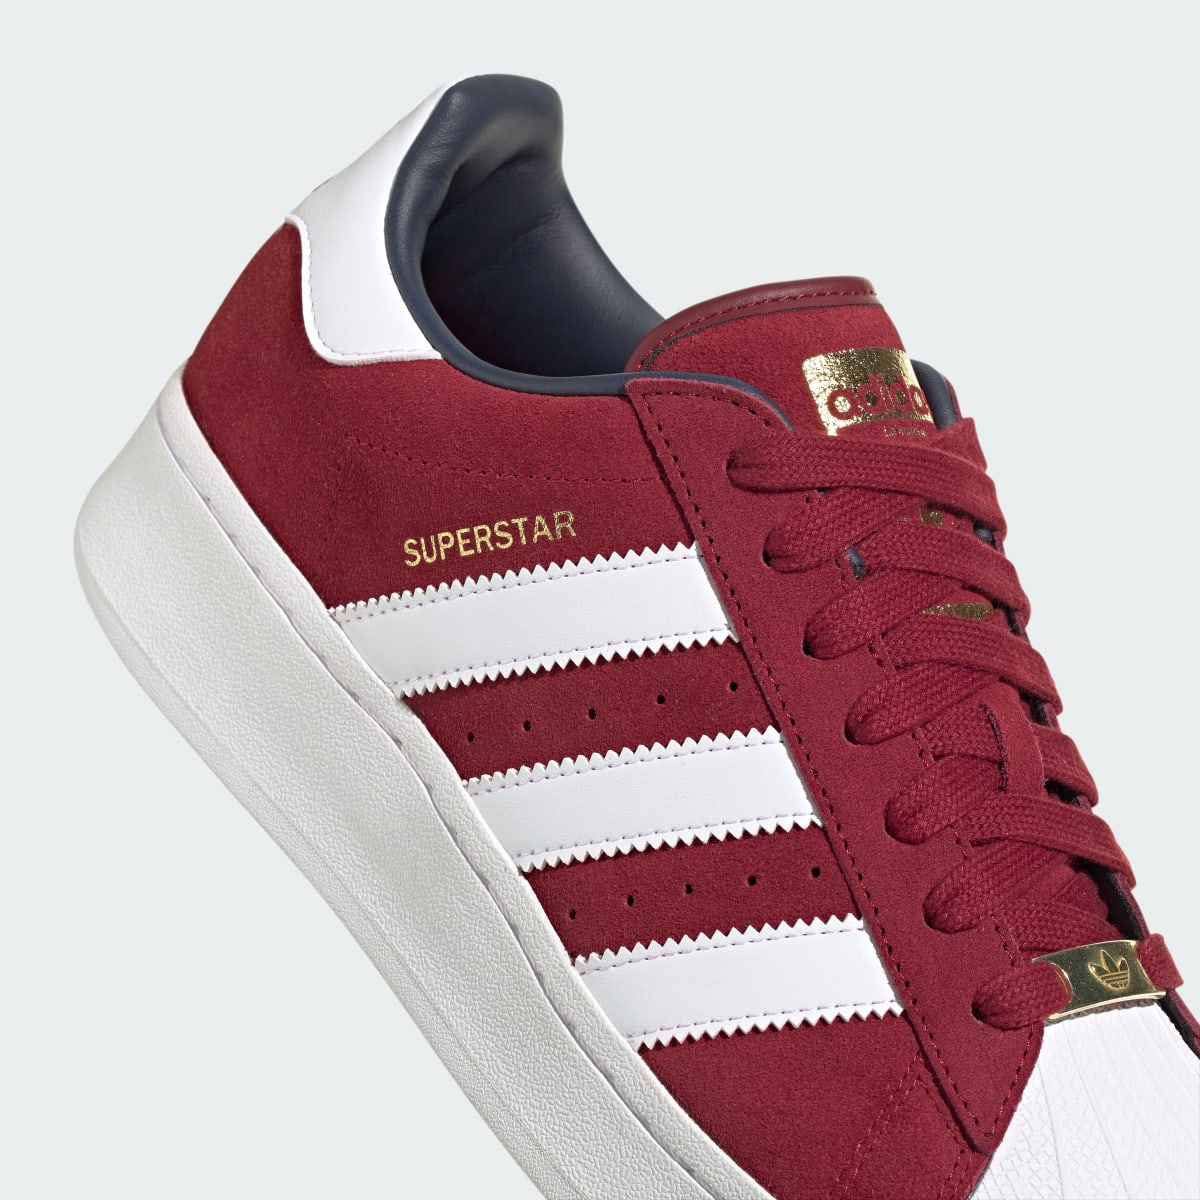 Adidas Superstar XLG Shoes. 9